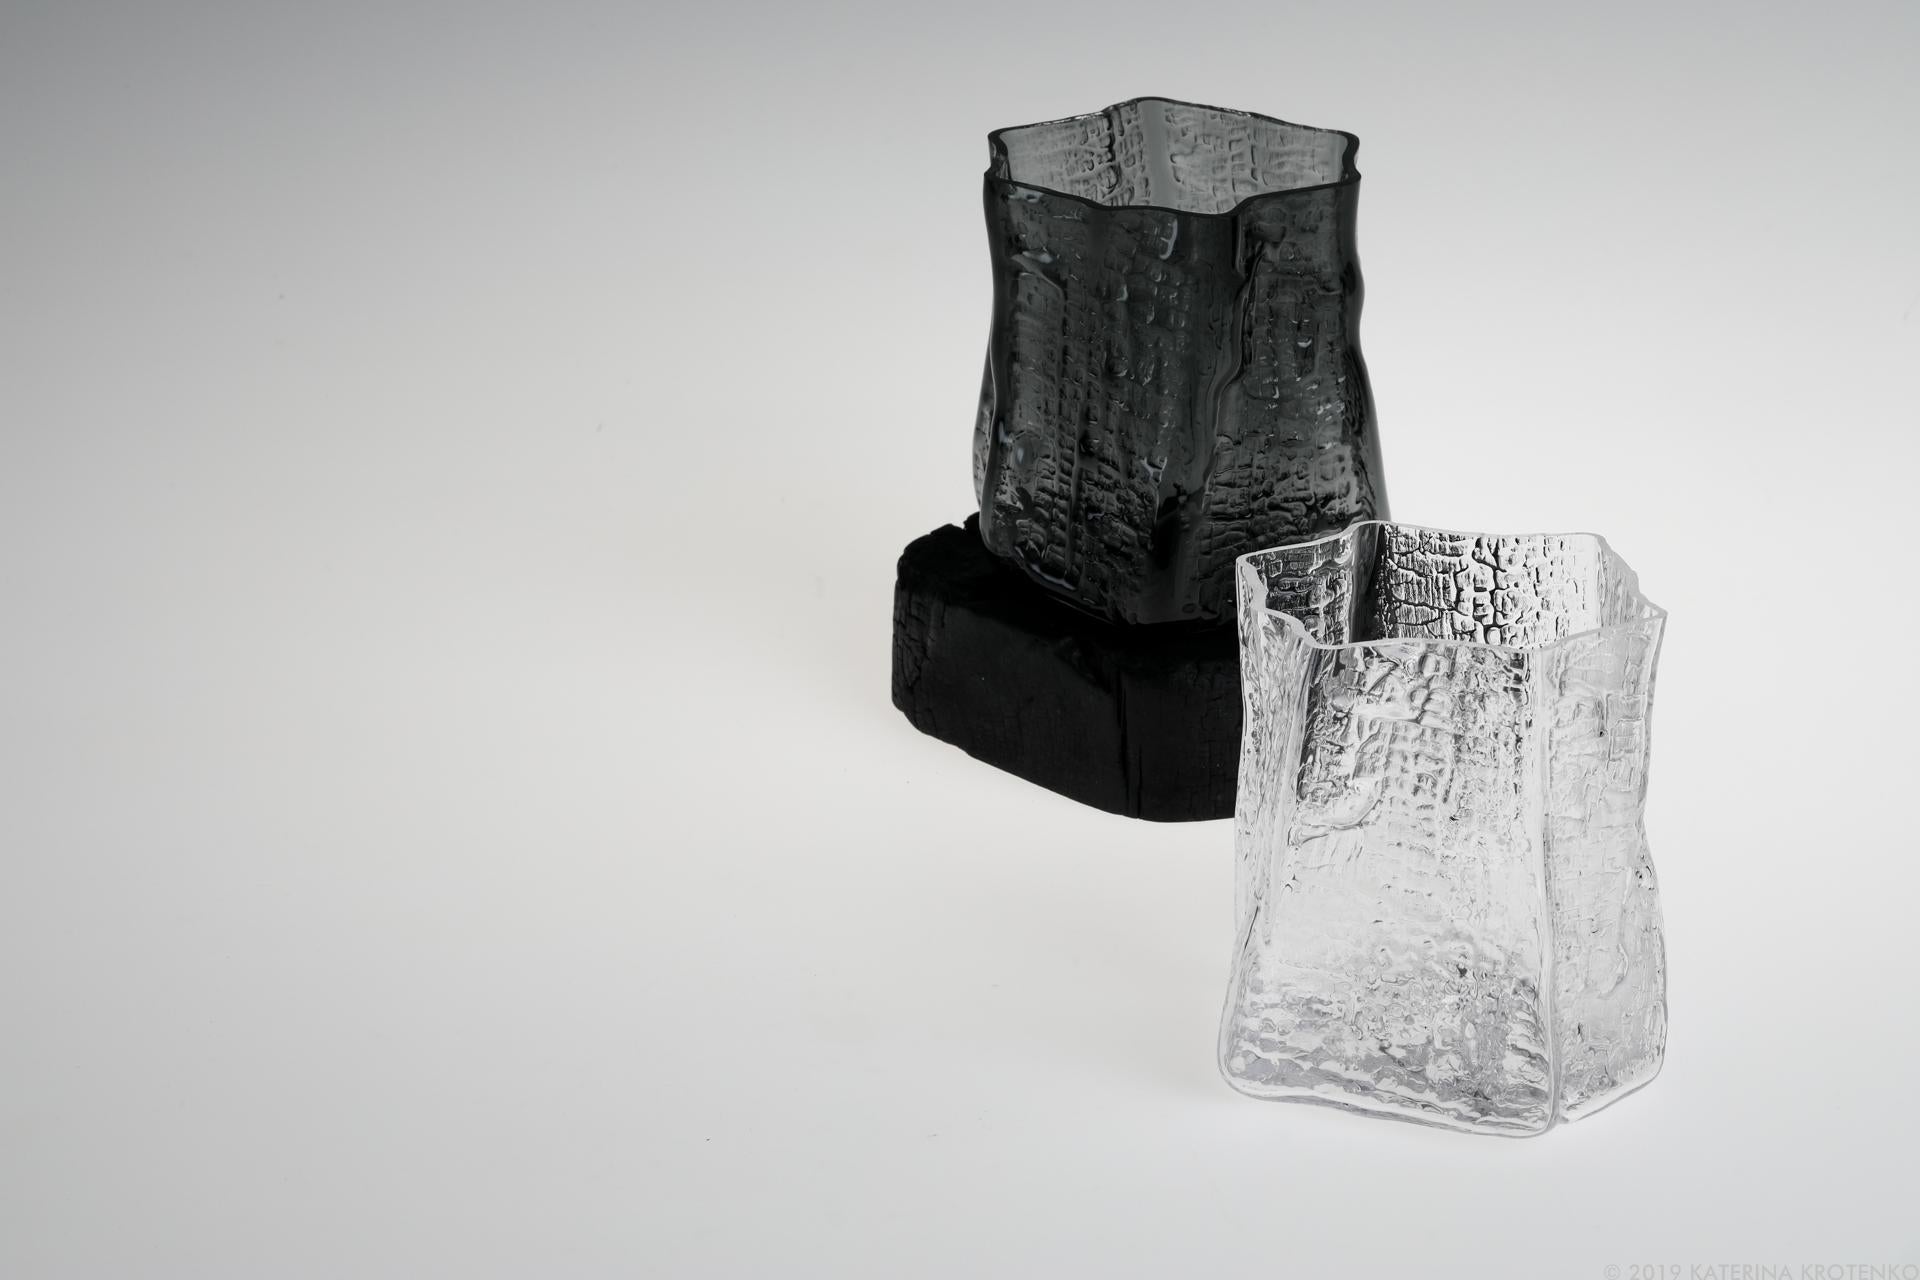 Shaped by fire / Drago — a pair of miniature glass vessels